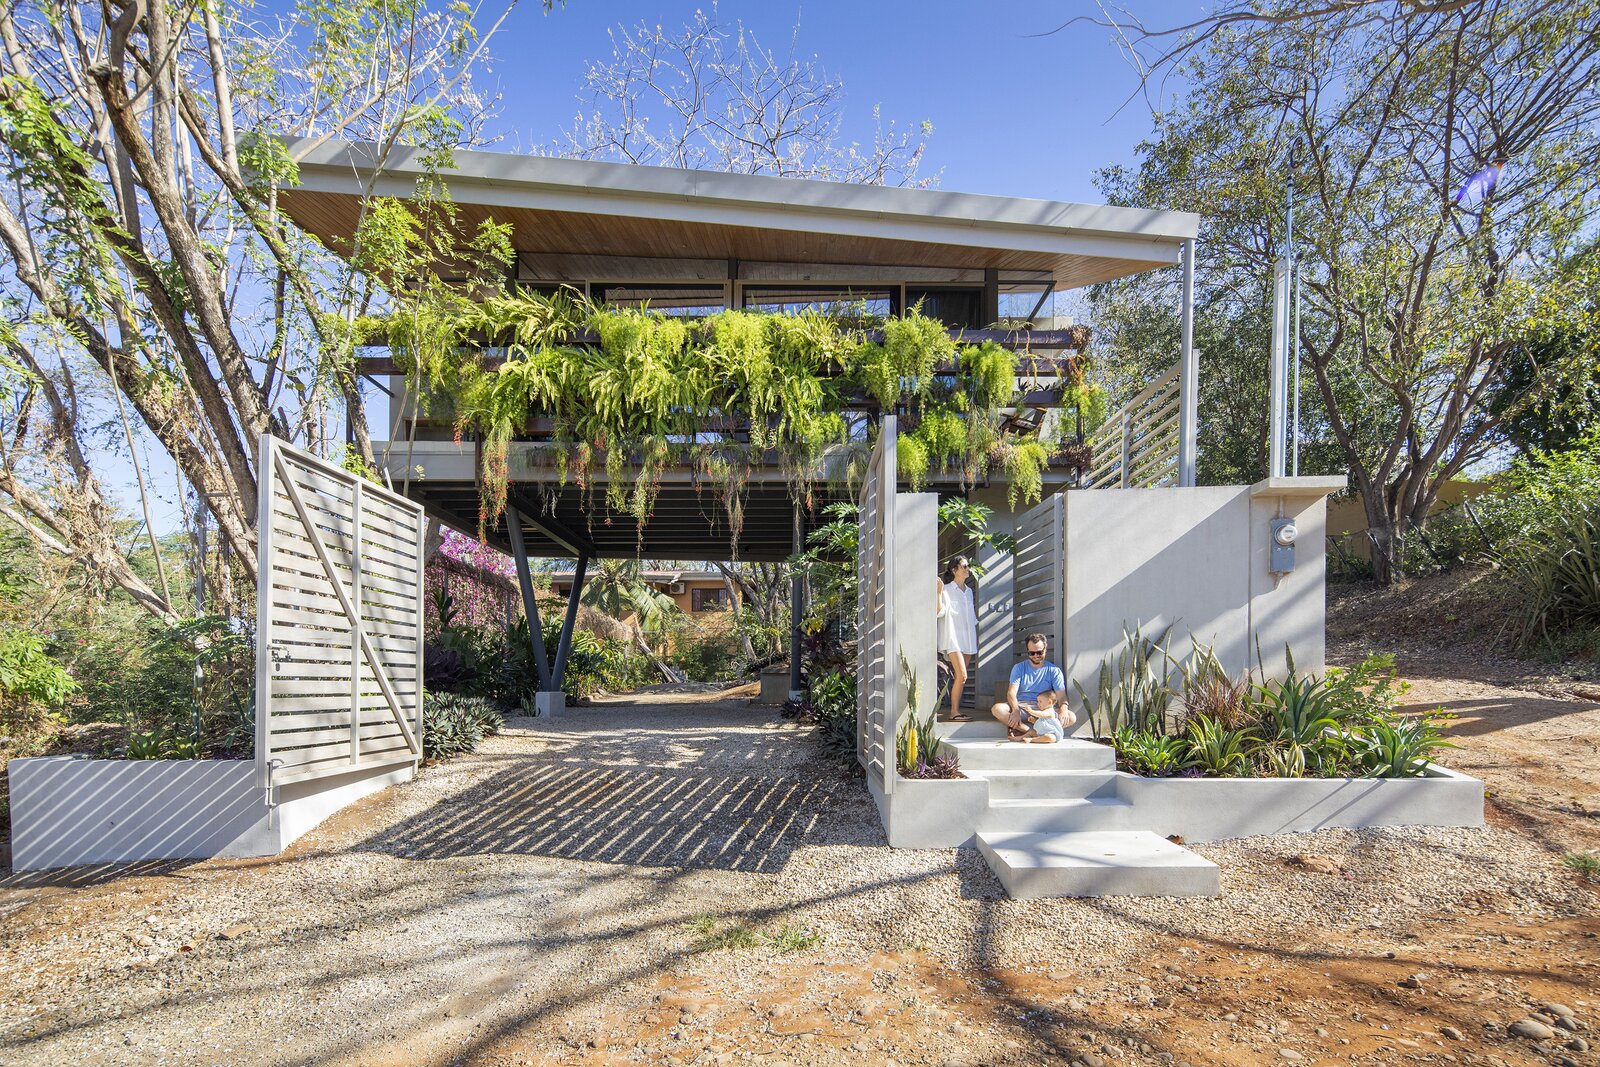 An Architect’s Family Home in Costa Rica Is a Self-Sustaining Oasis